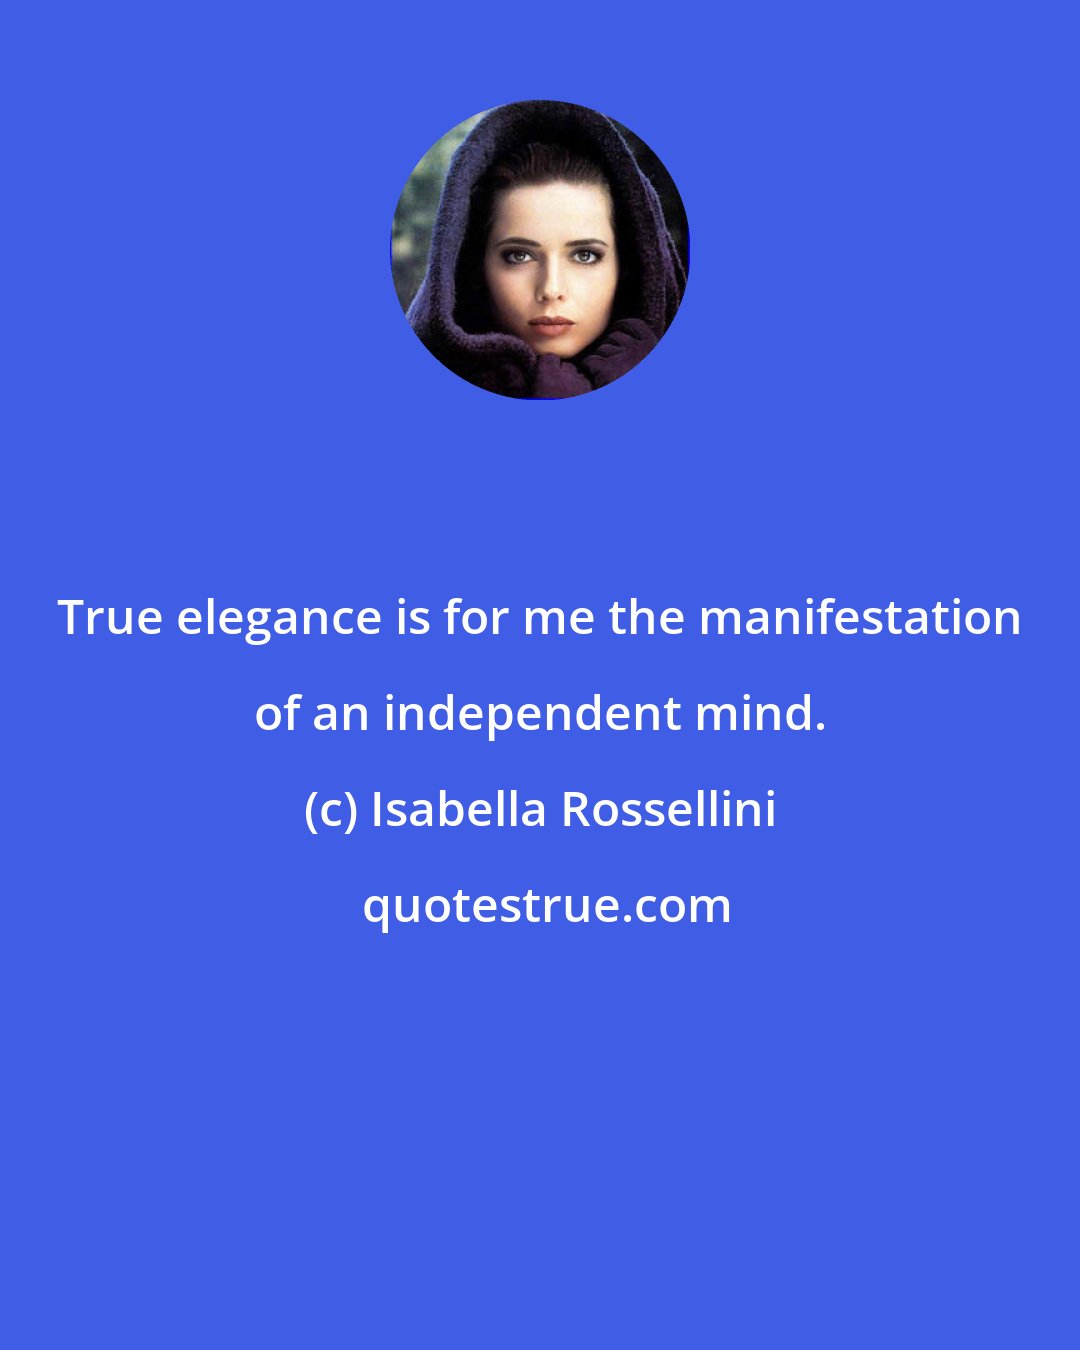 Isabella Rossellini: True elegance is for me the manifestation of an independent mind.